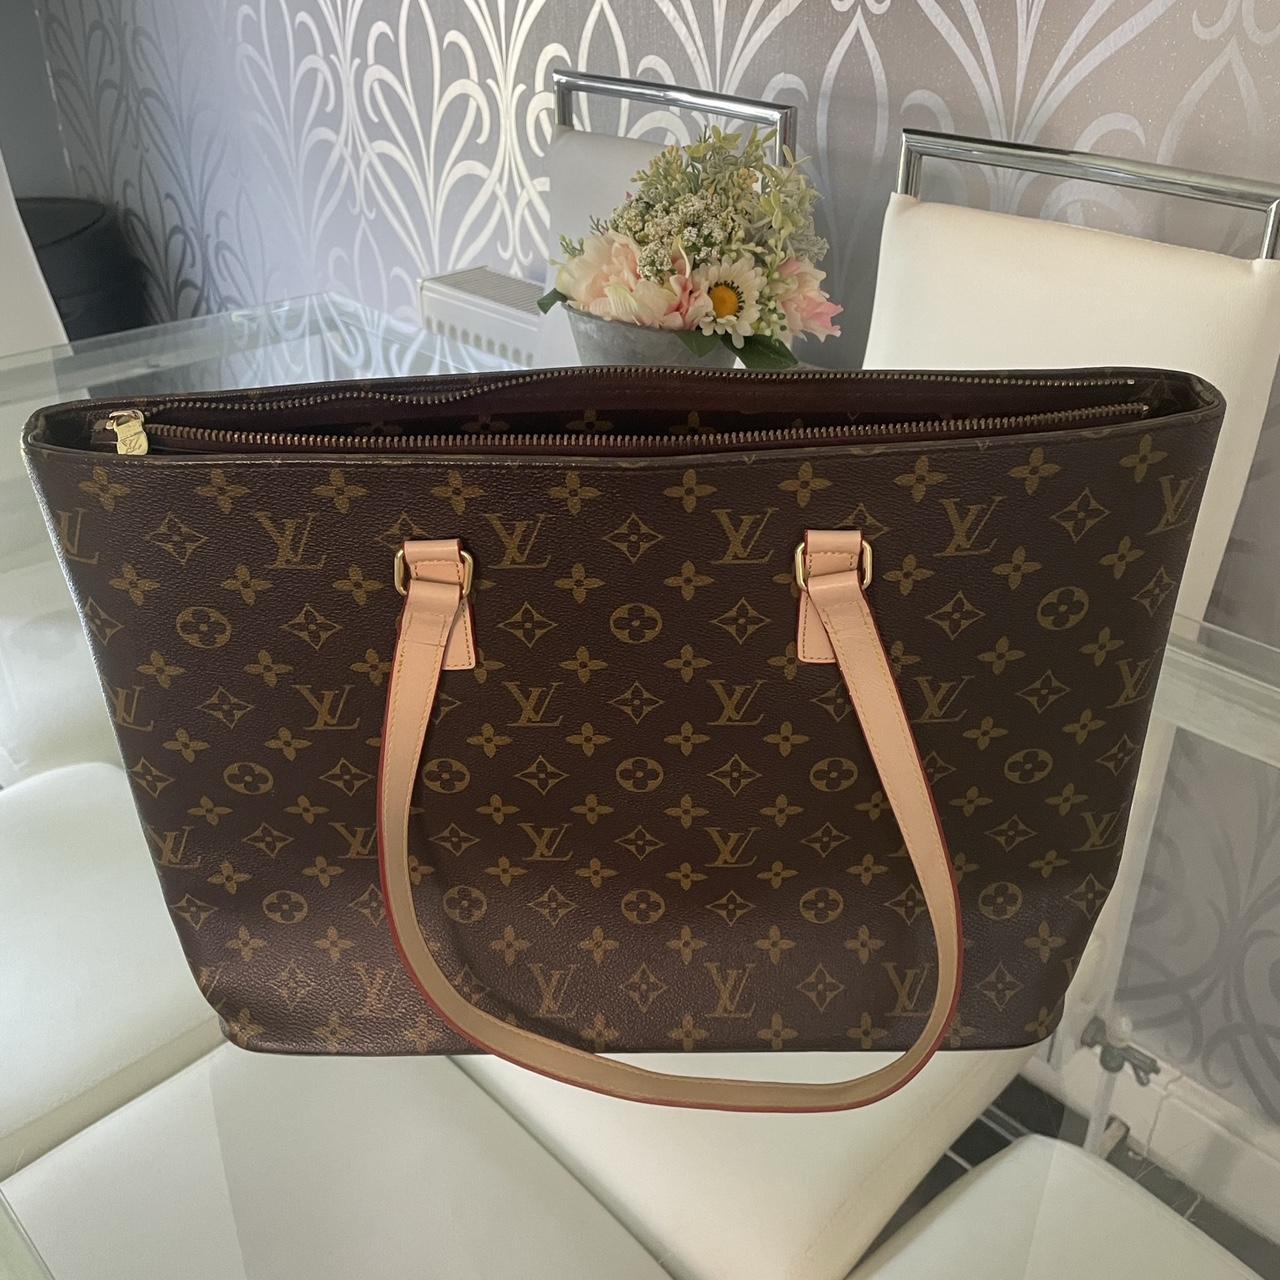 LV bag good condition given as gift but not used - Depop